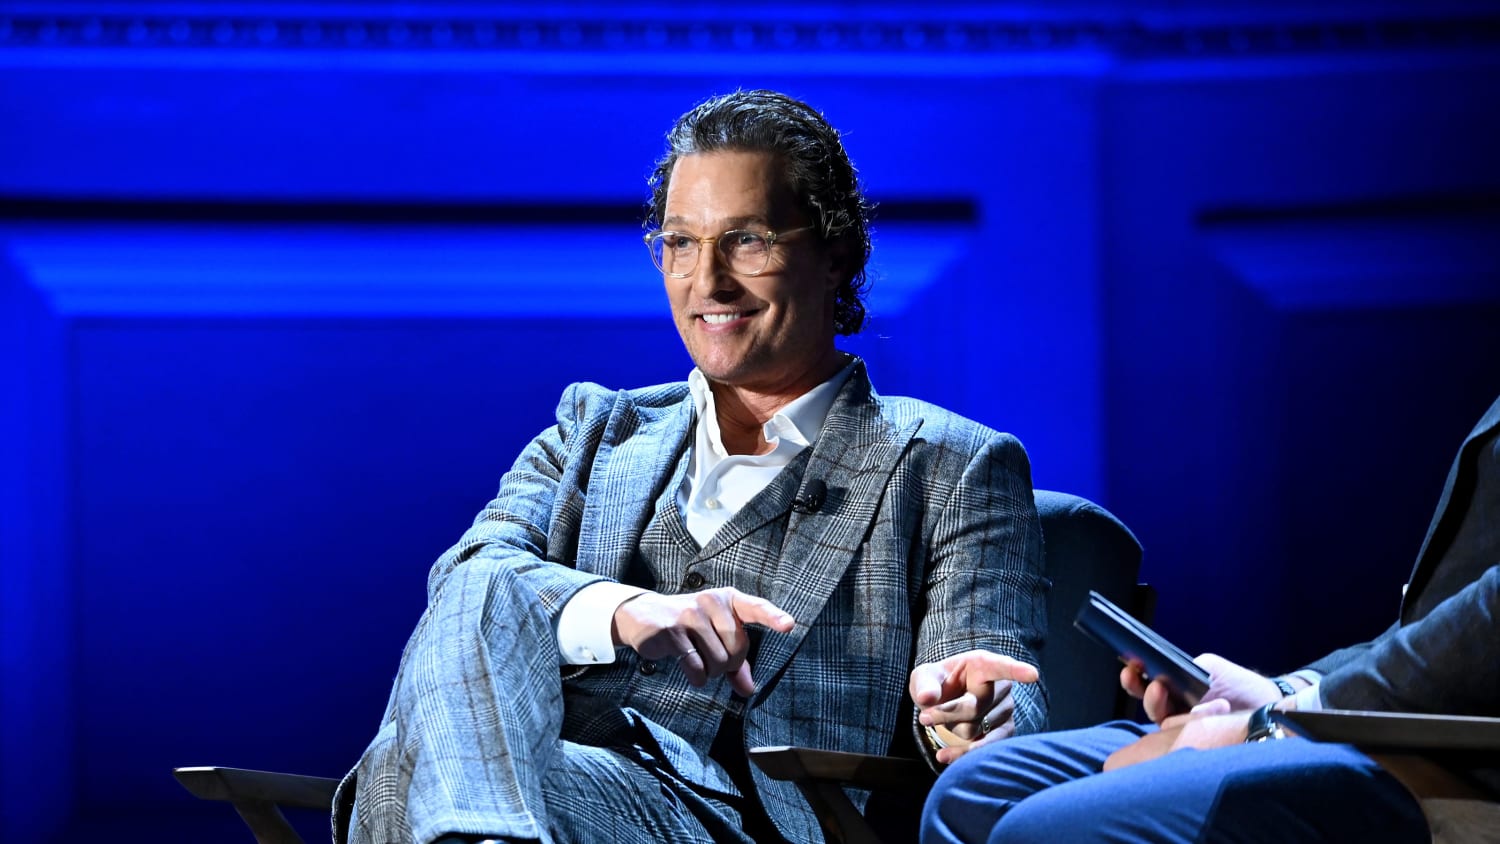 'Growing pains are good': Matthew McConaughey calls on America to reflect, other celebs criticize July 4th holiday